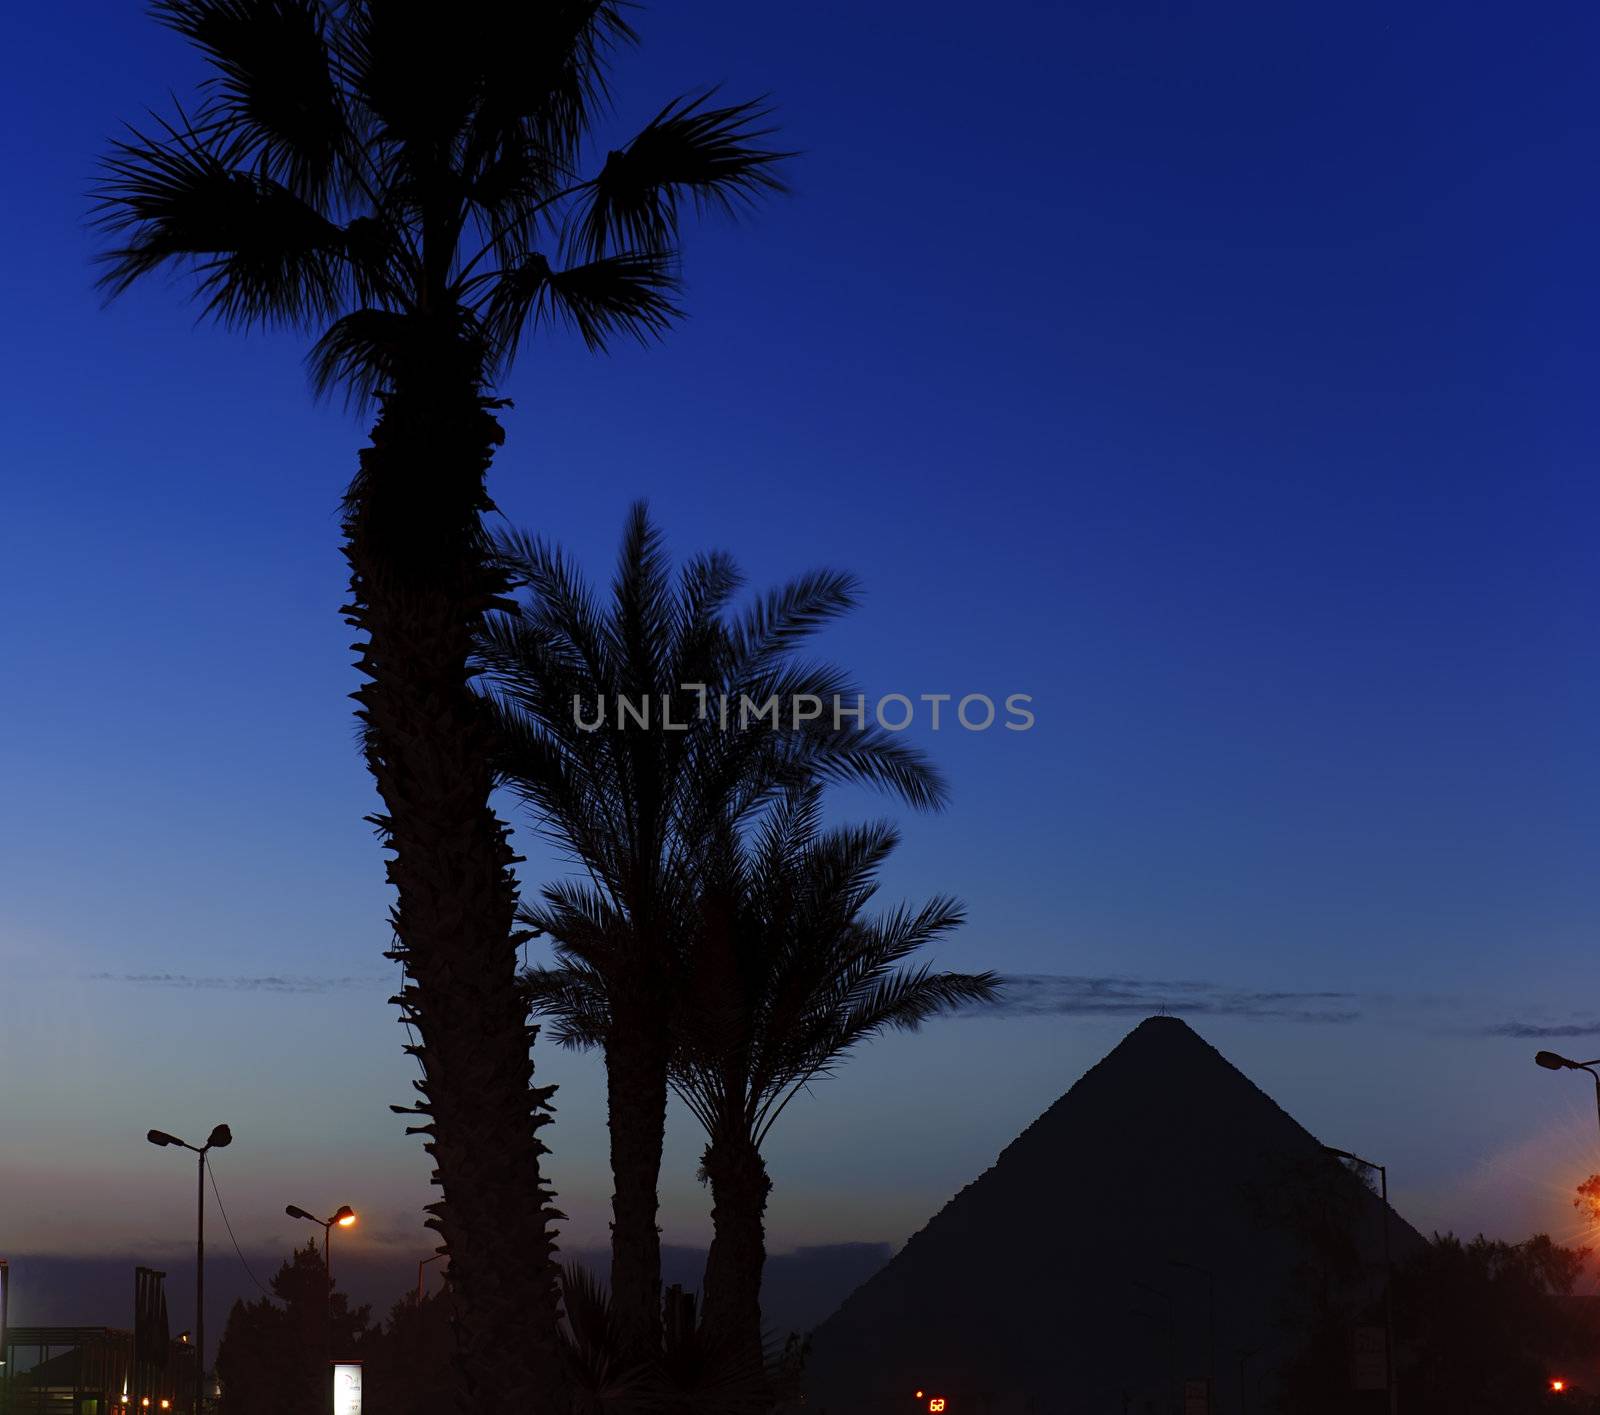 Pyramid of Giza in the morning